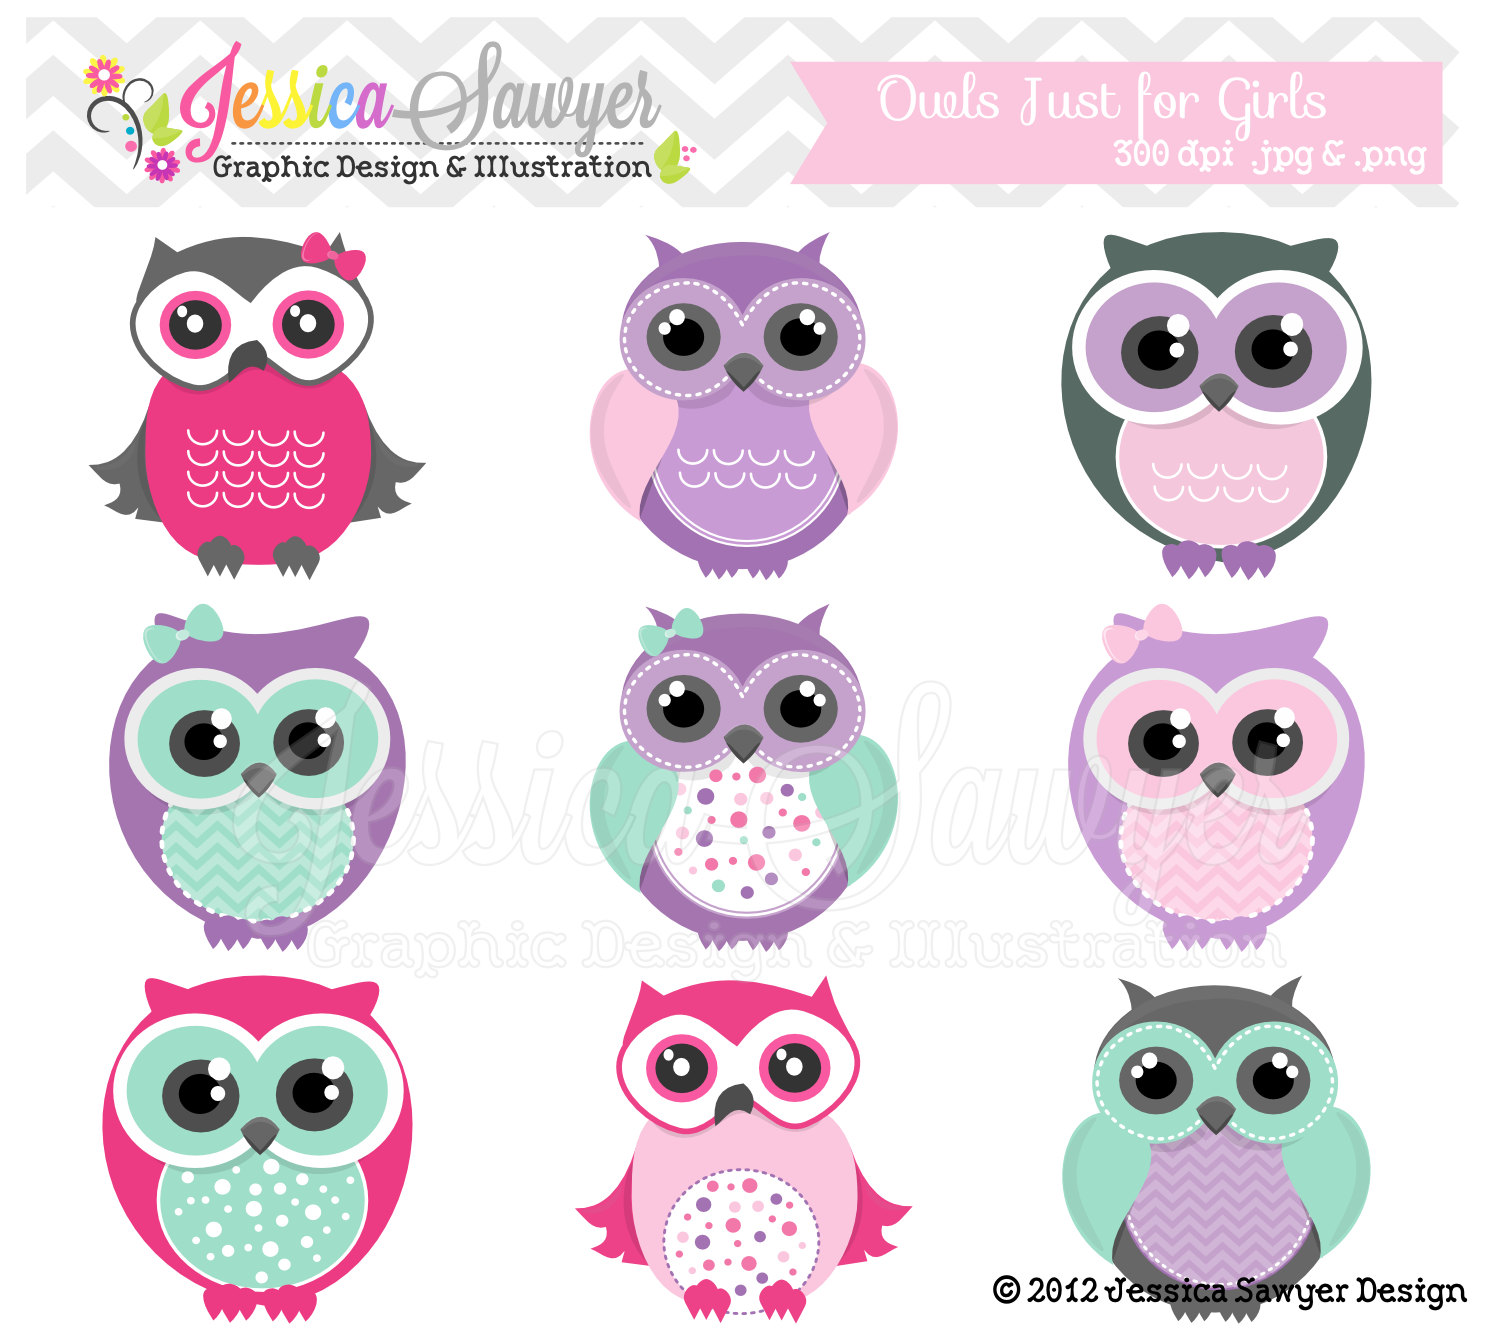 80  Off Instant Download Cute Owl Clipart By Jessicasawyerdesign